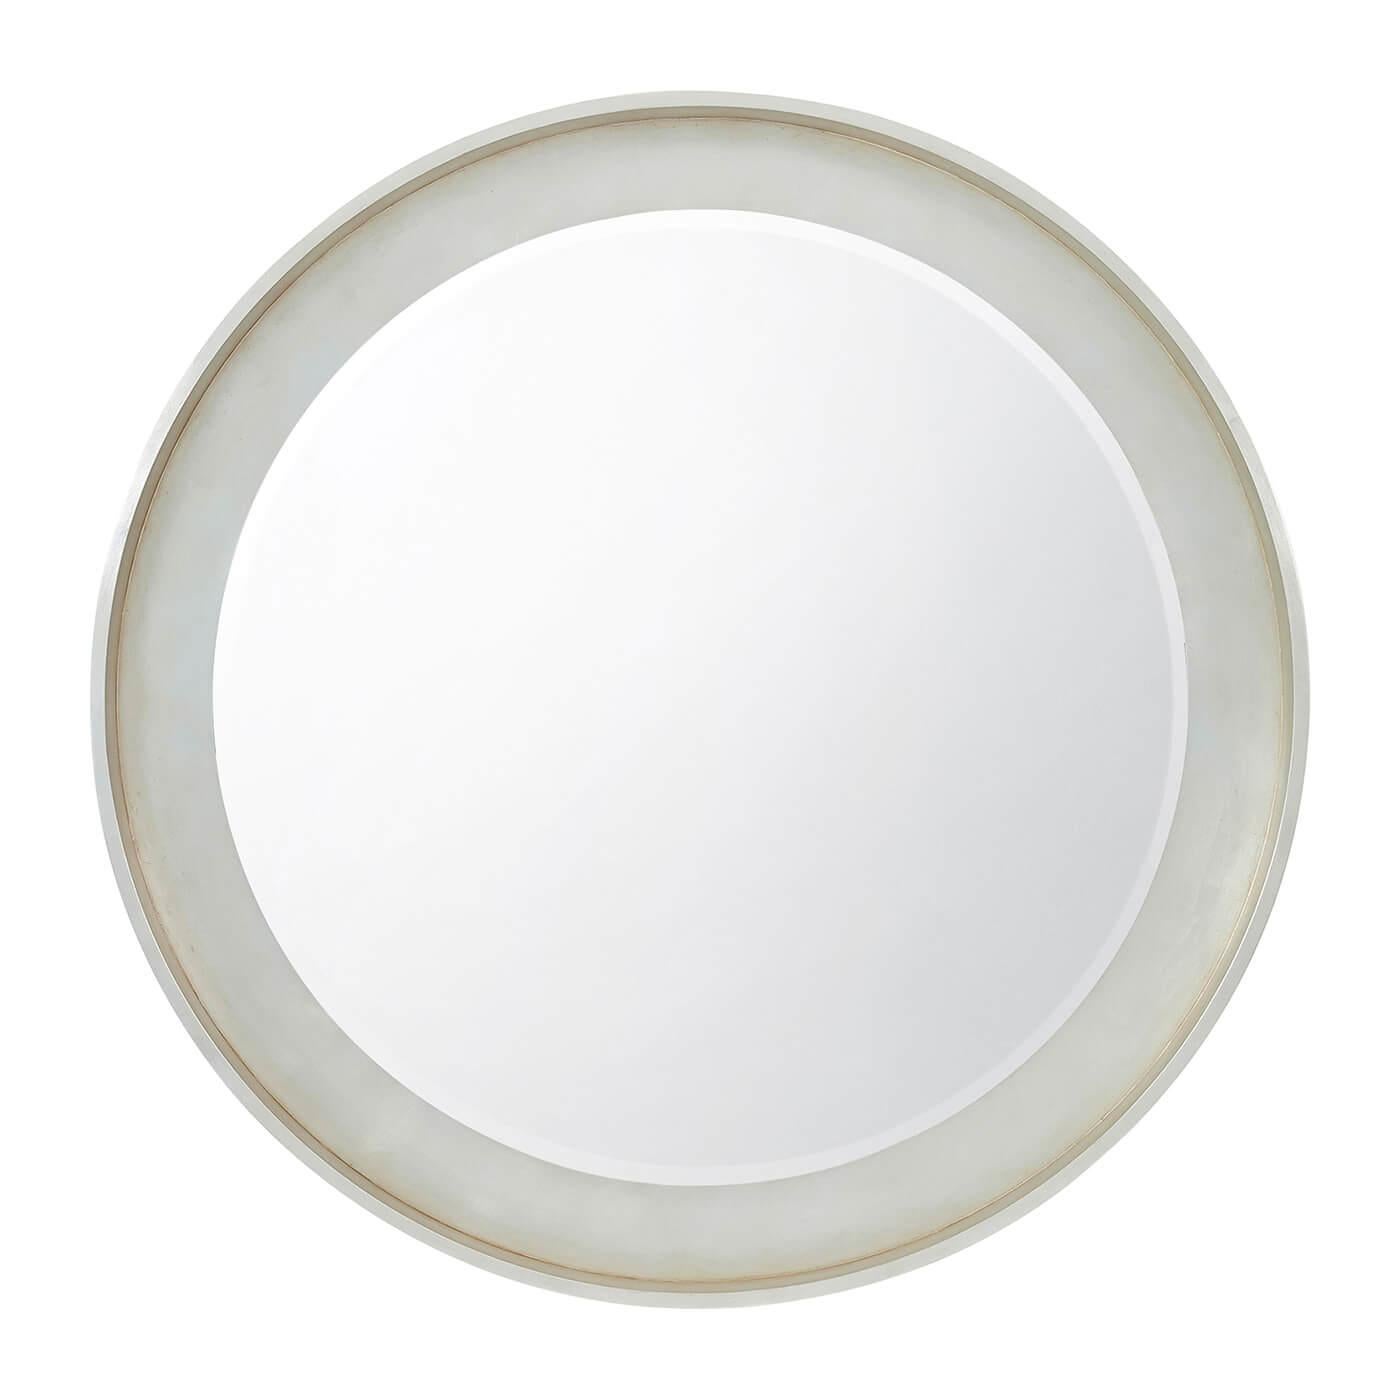 Modern silver leaf molded edge mirror with a floating bevelled edge mirror plate.

Dimensions: 54